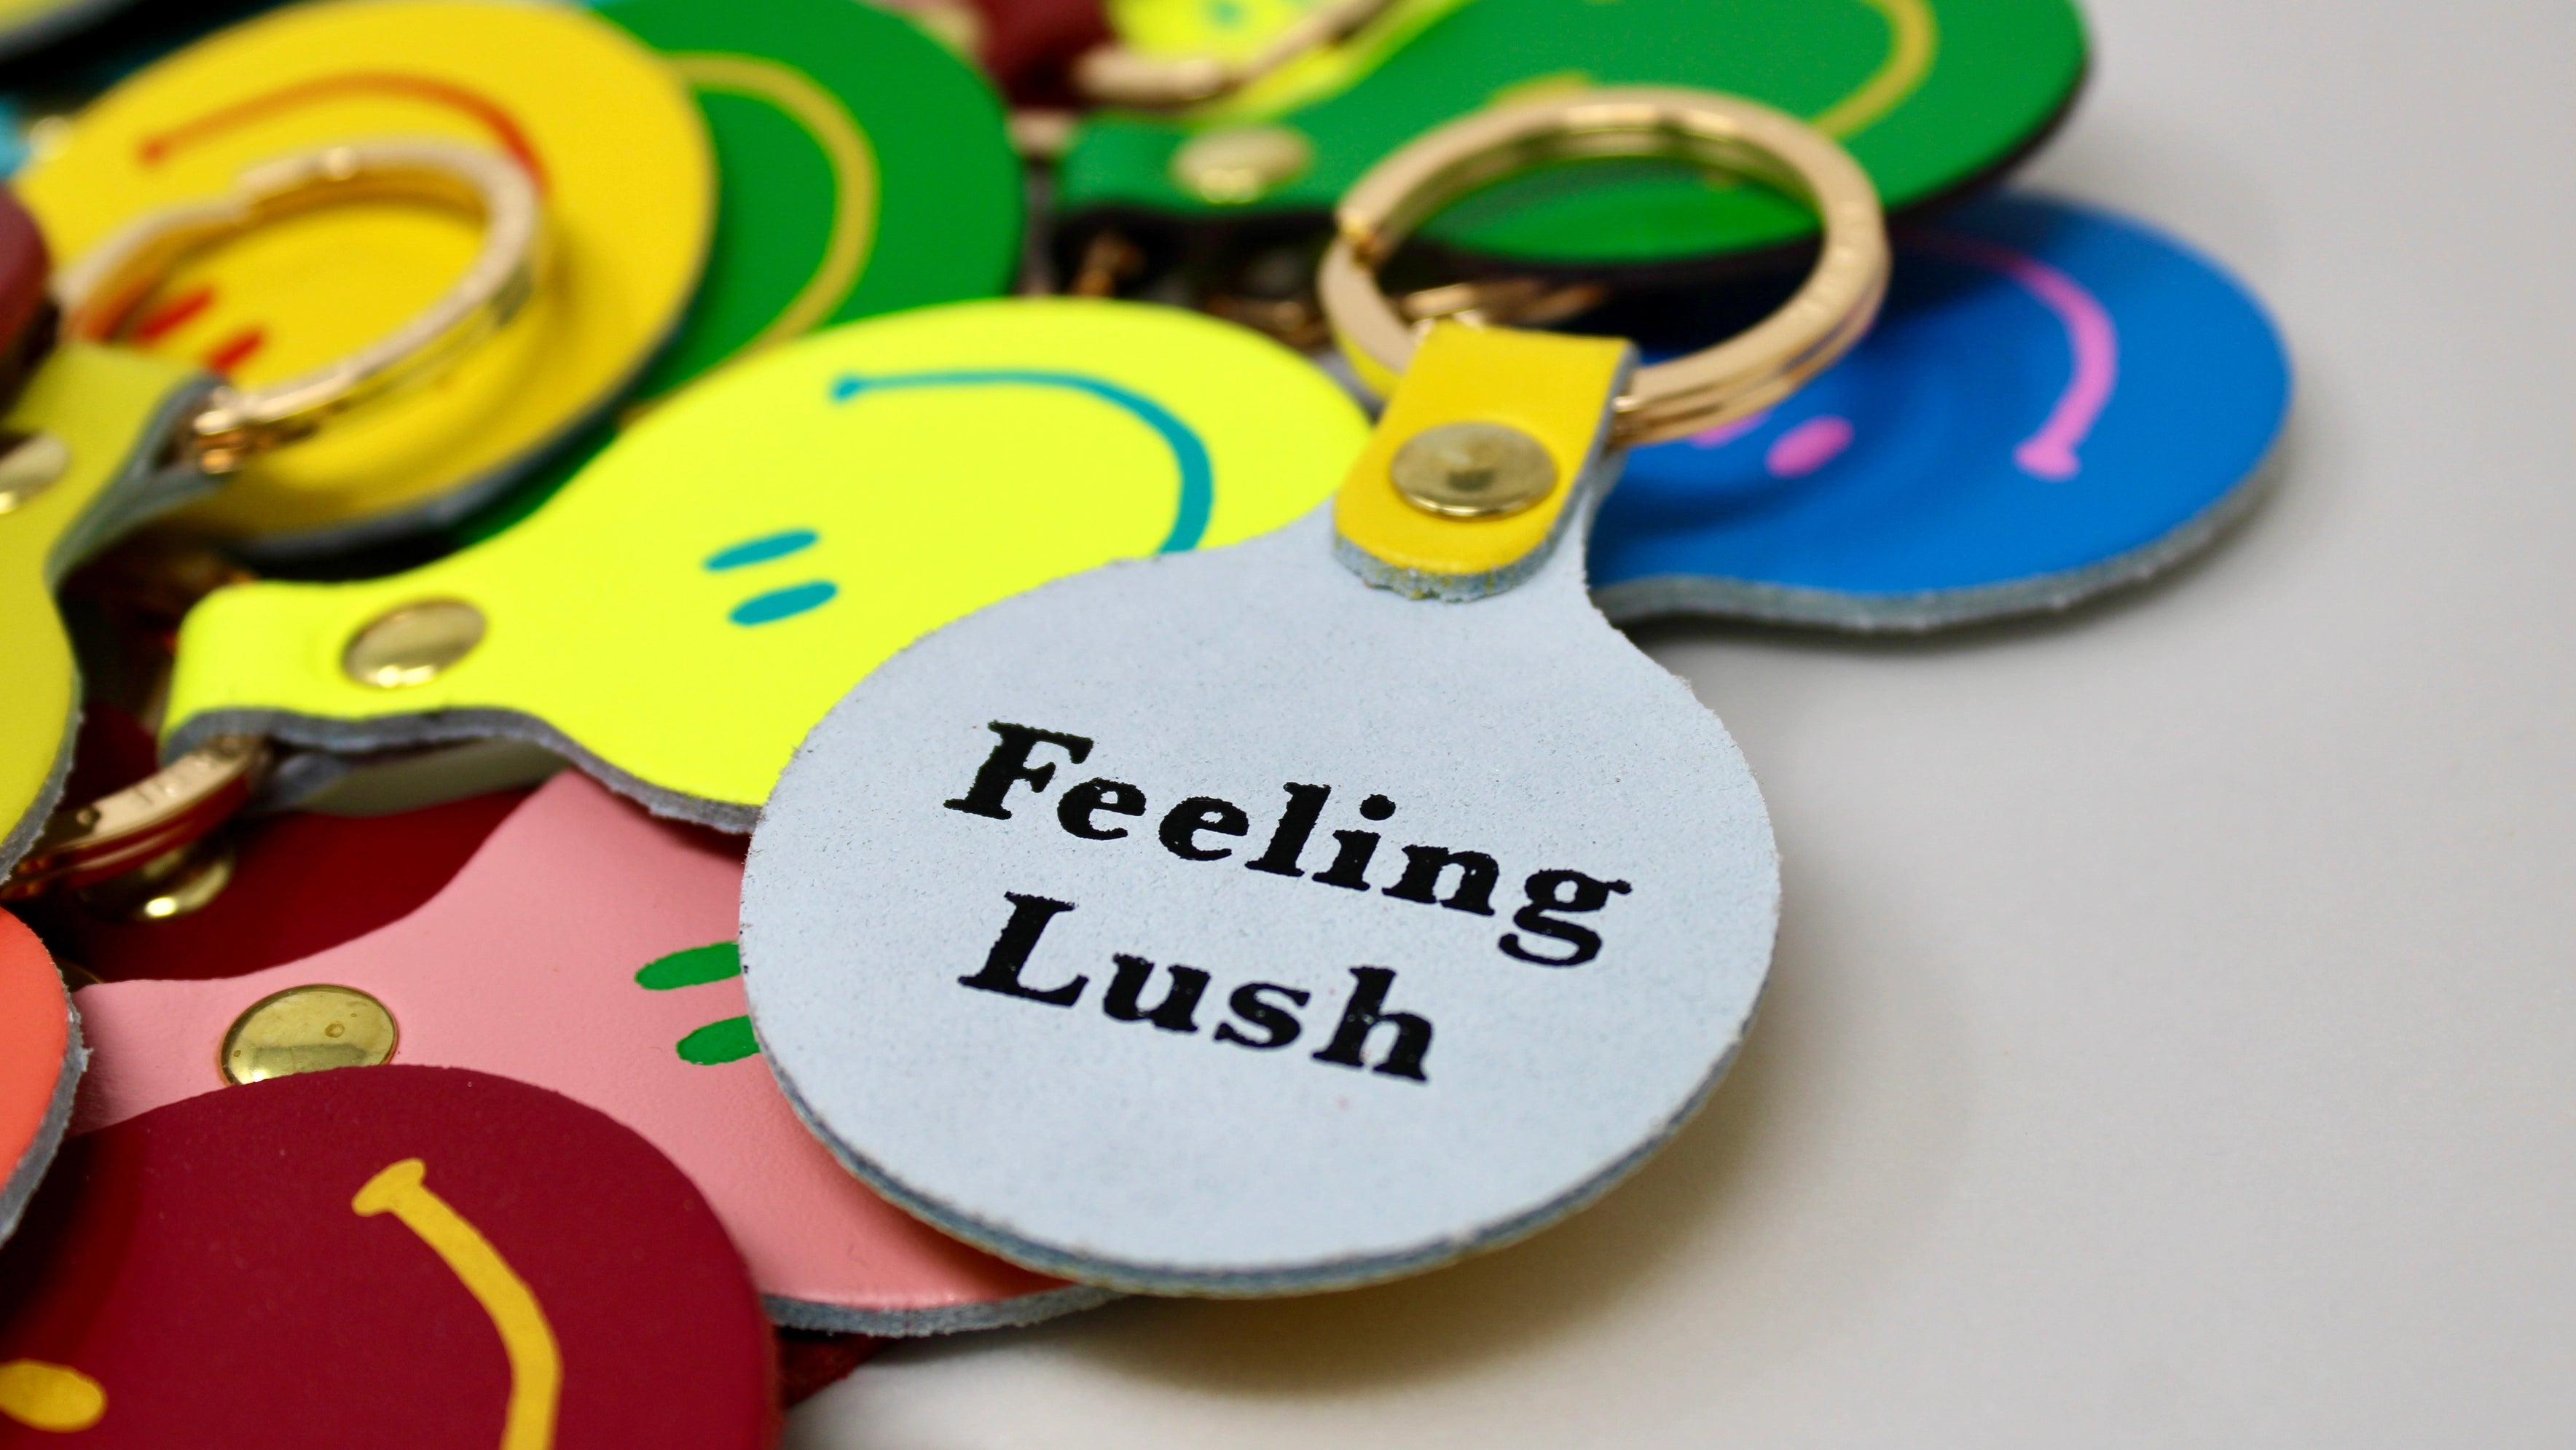 FEELING LUSH SMILIE FACE KEY RING | YELLOW & RED